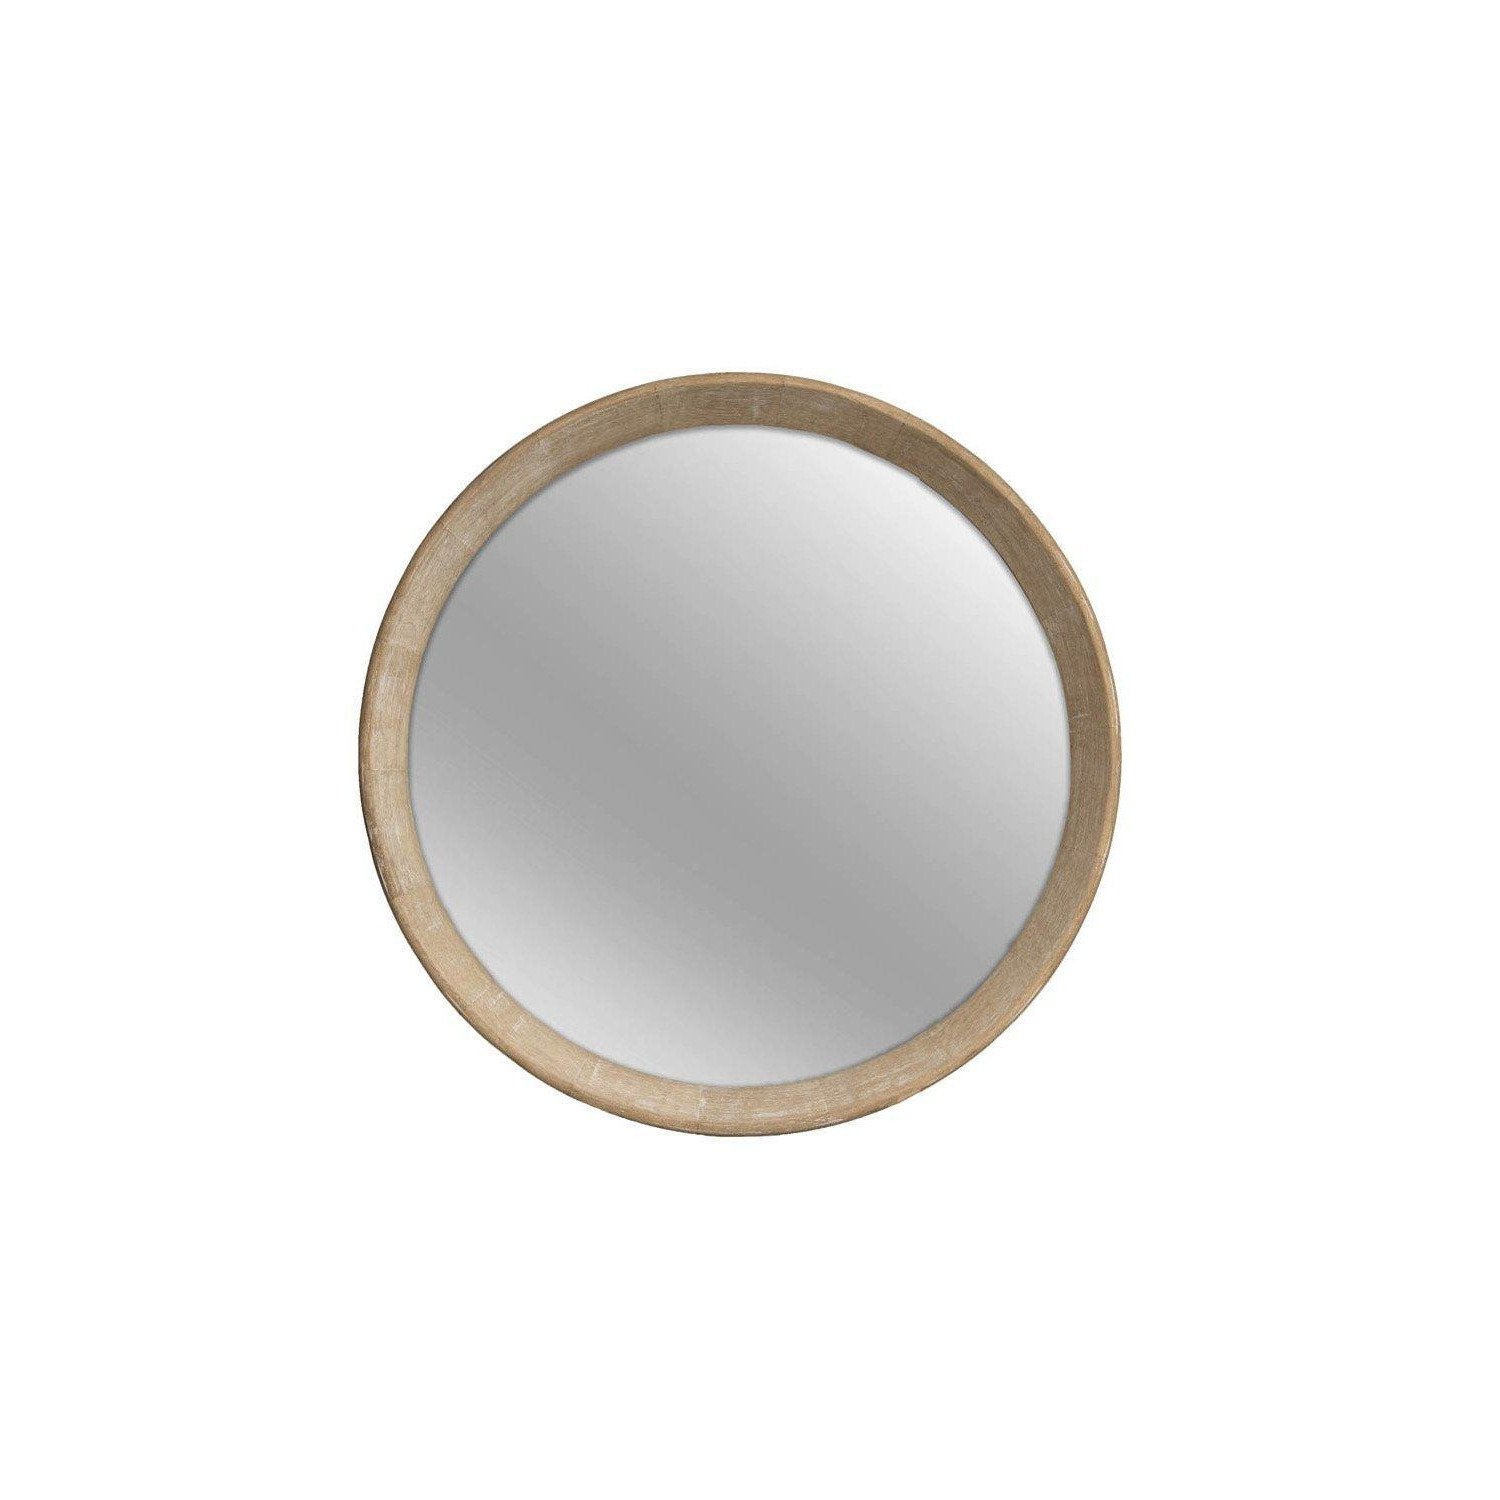 Luna Round Bedroom Wall Mirror Living Room Mirror Whitewashed Wood Finish - 40cm - image 1